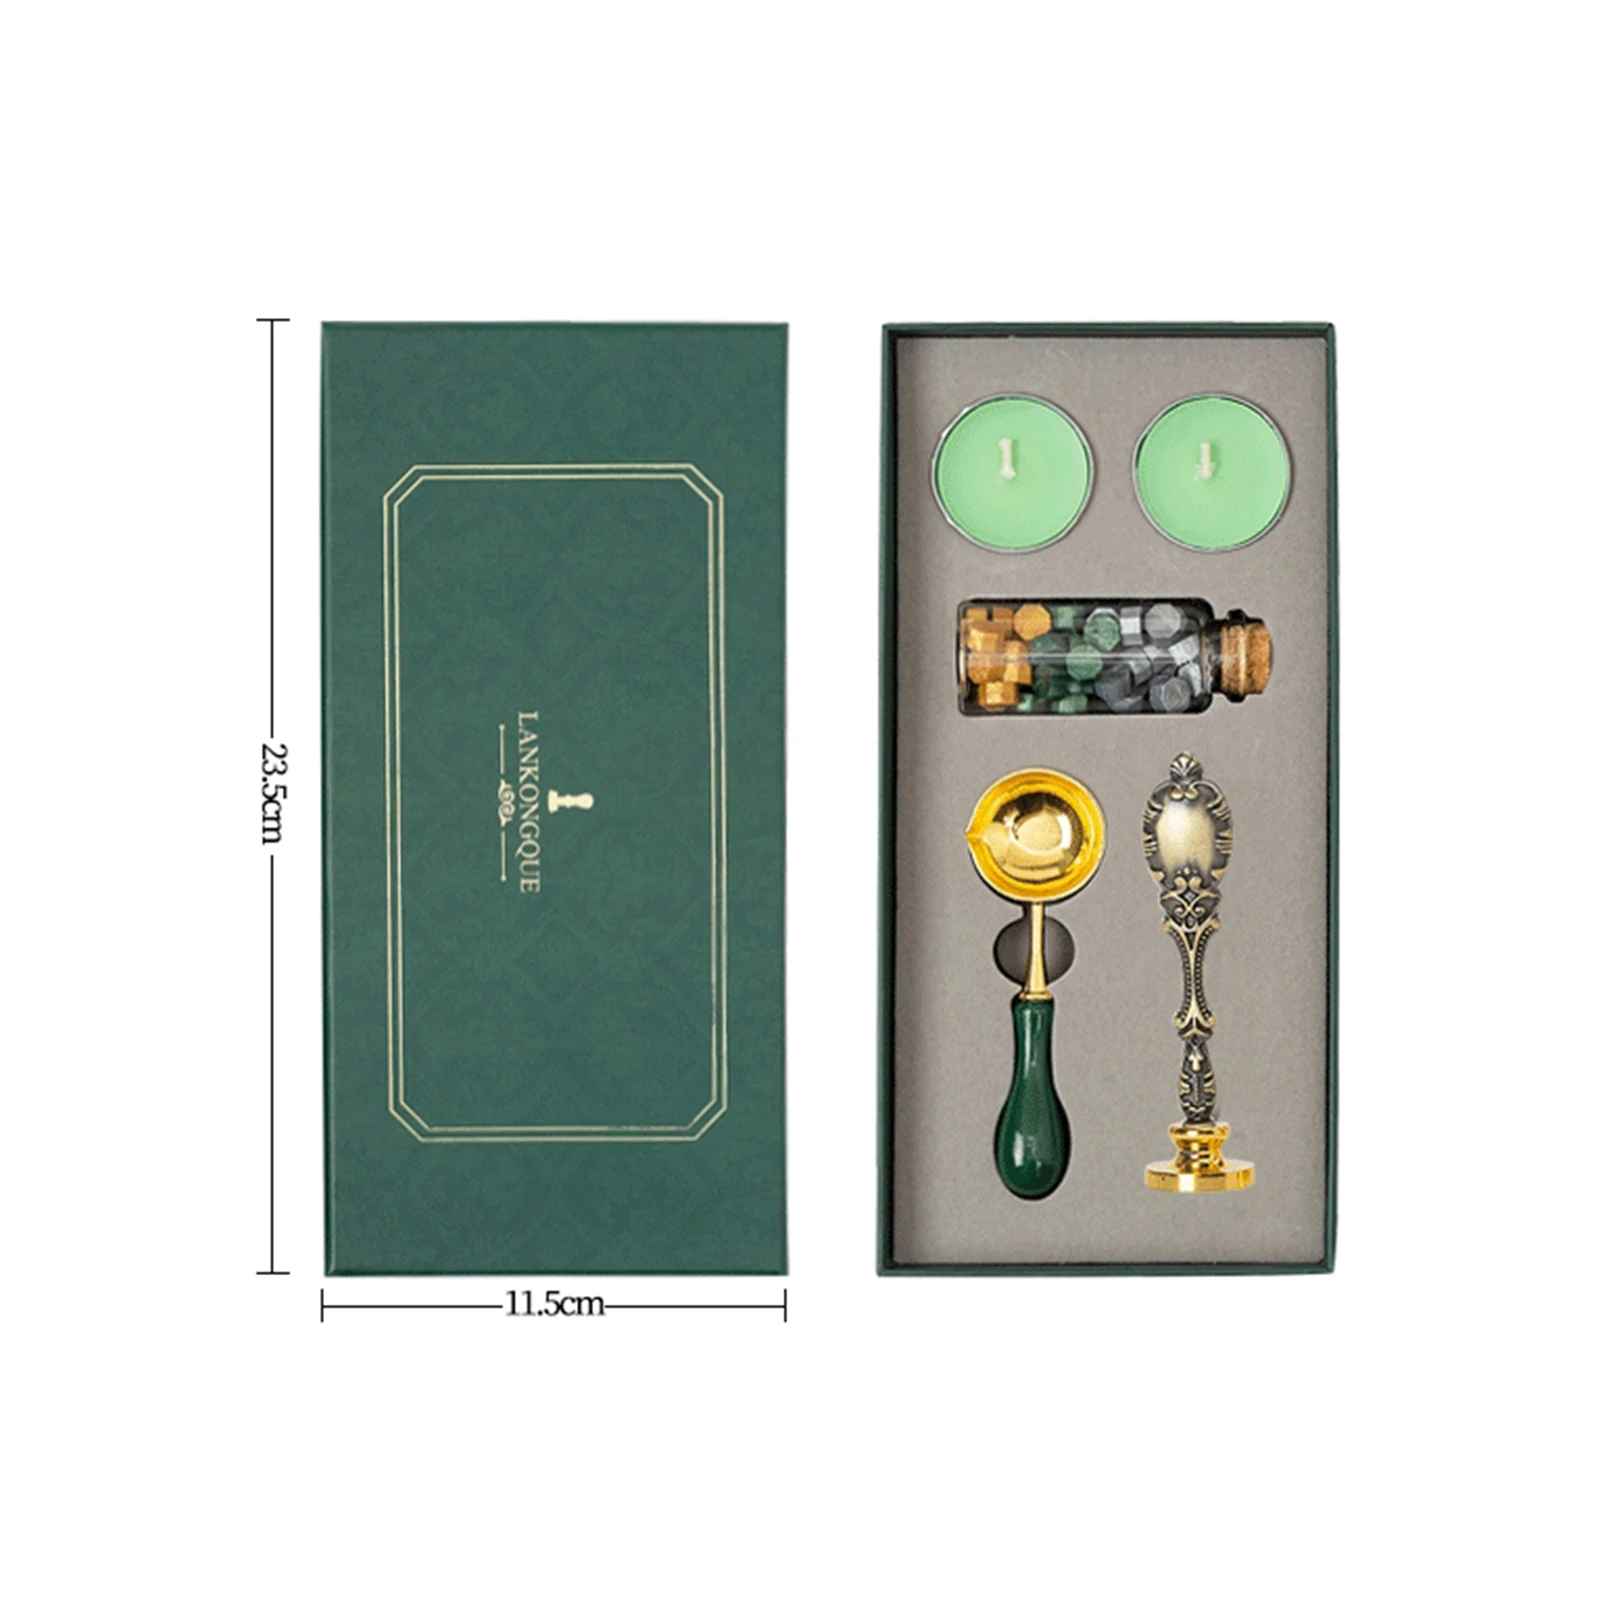 Scissors Vintage Wax Seal Kit Sealing Wax Beads Wax Seal Stamp Wax Melting Spoon Candle with Exquisite Packaging for Envelopes Letter